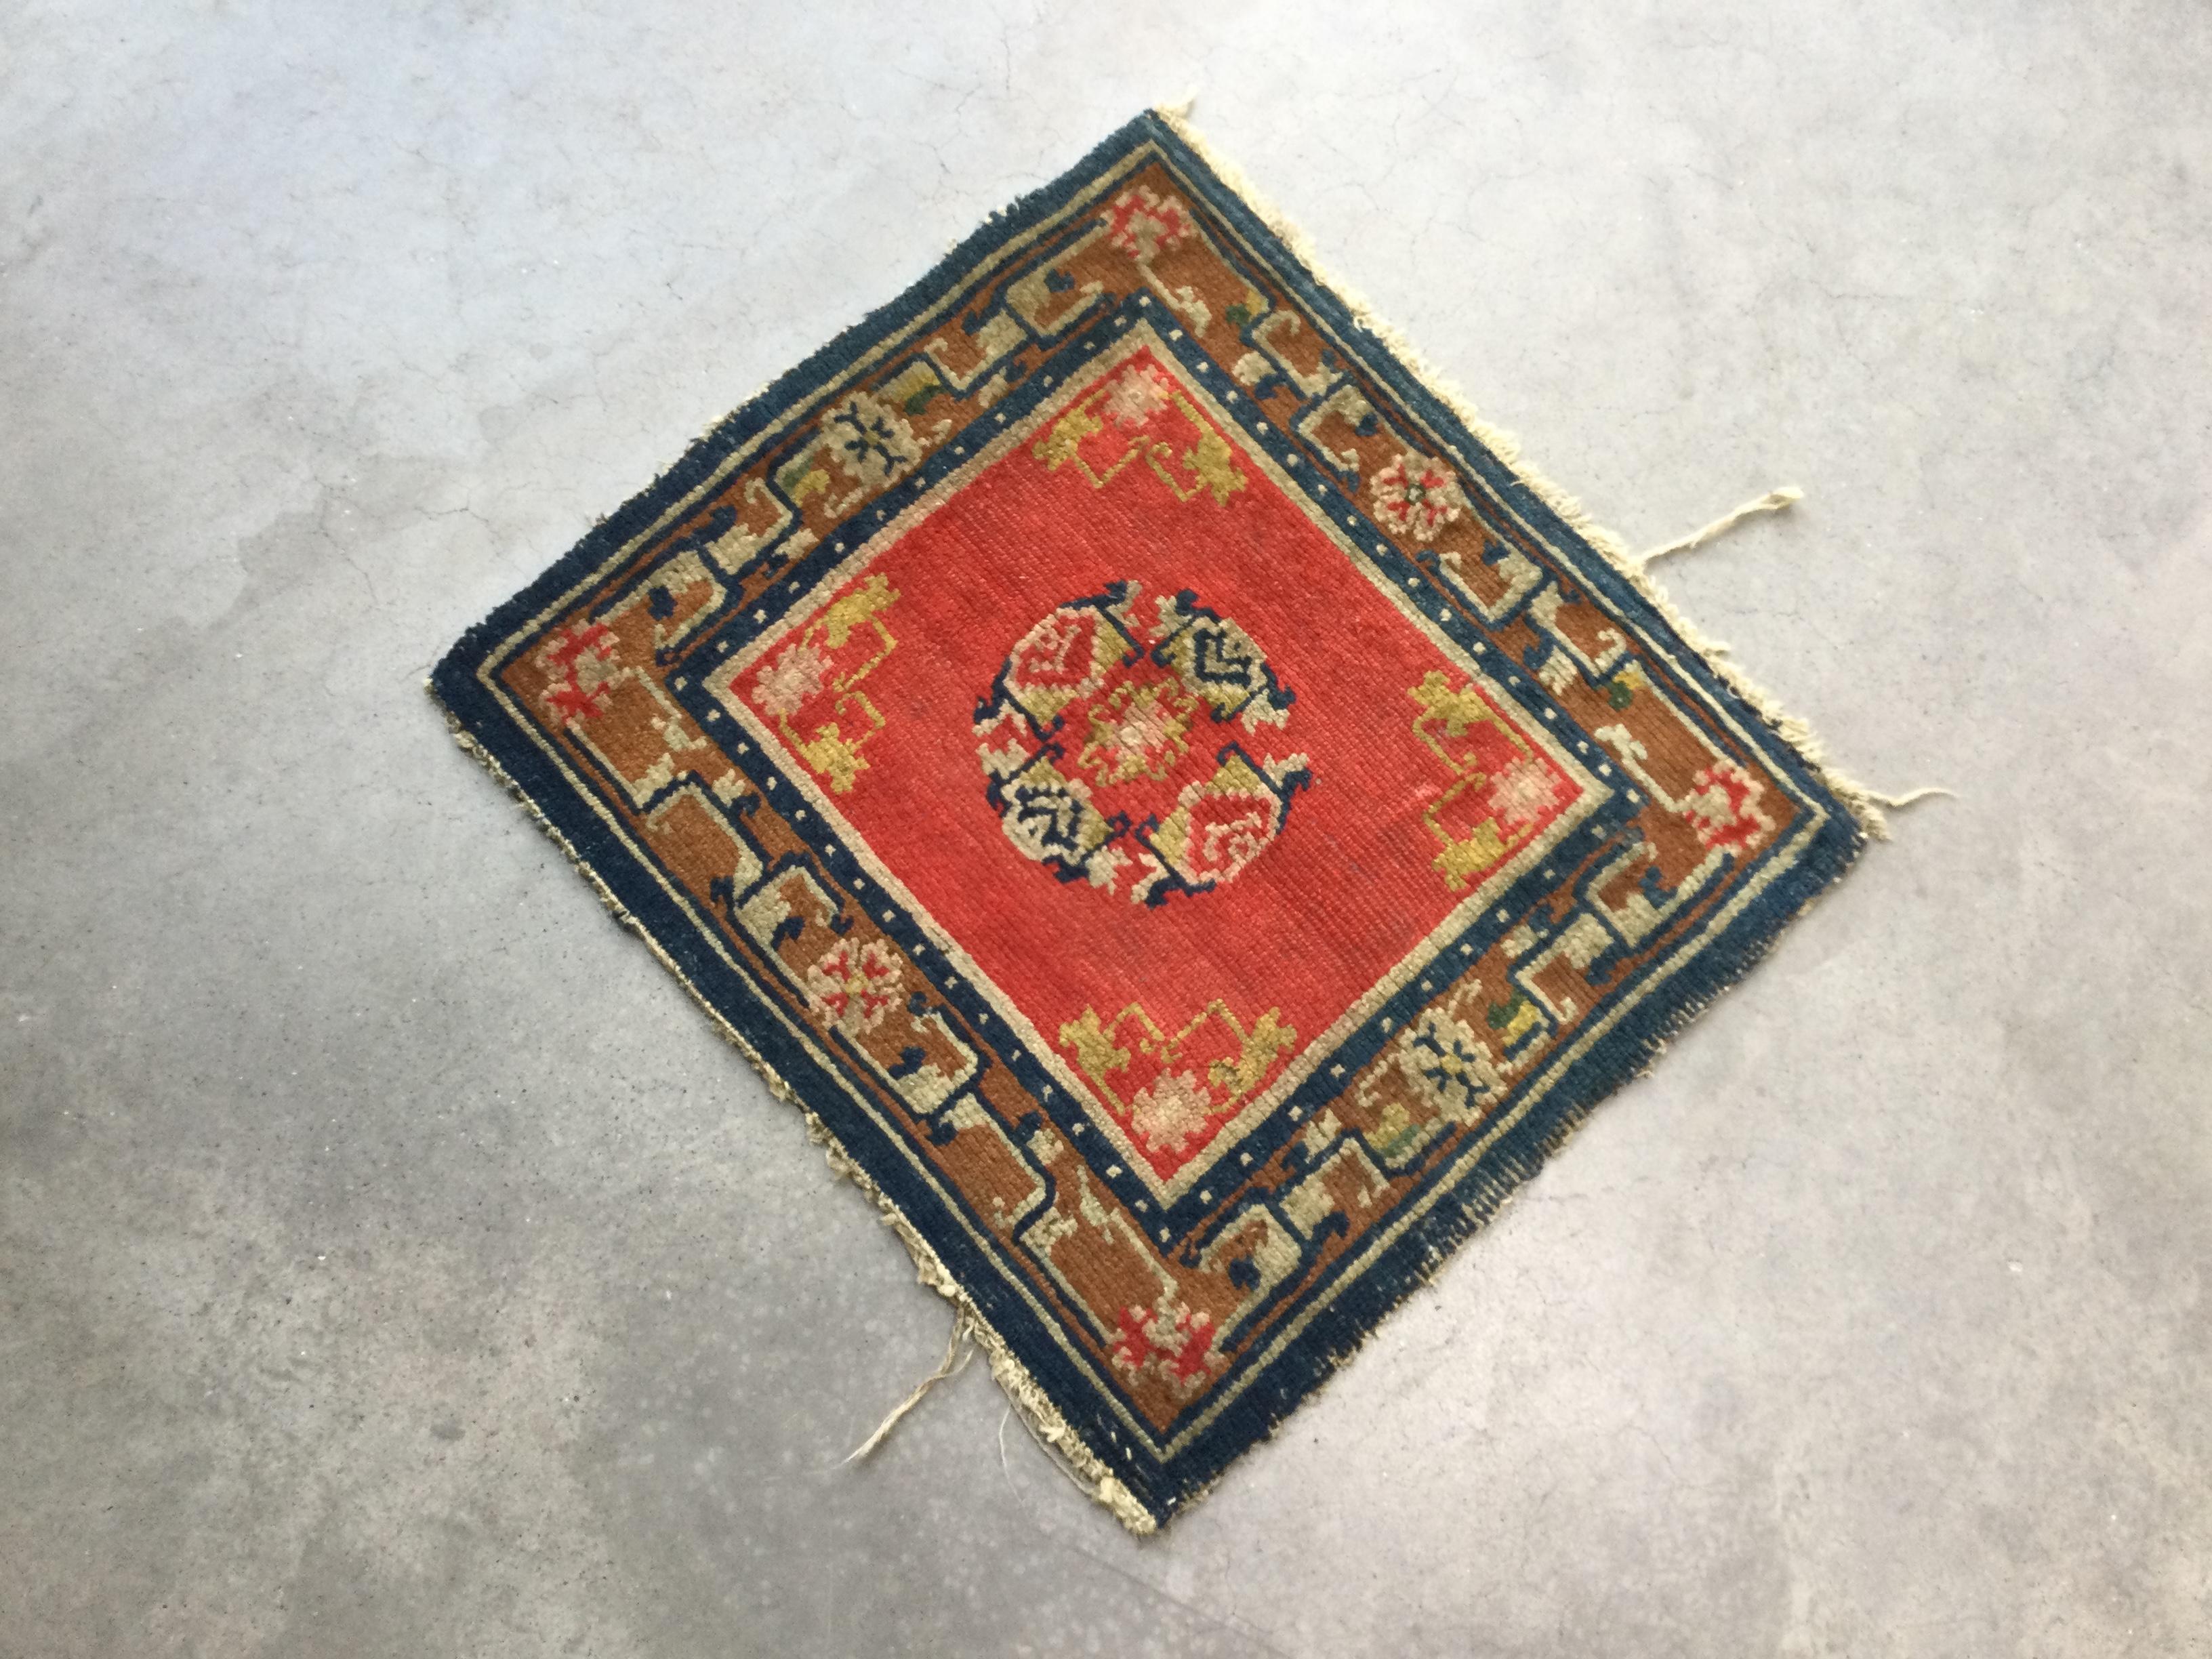 Hand-Knotted Antique Wool Rug. Tibetan Design. 0.62 x 0.69 m. For Sale